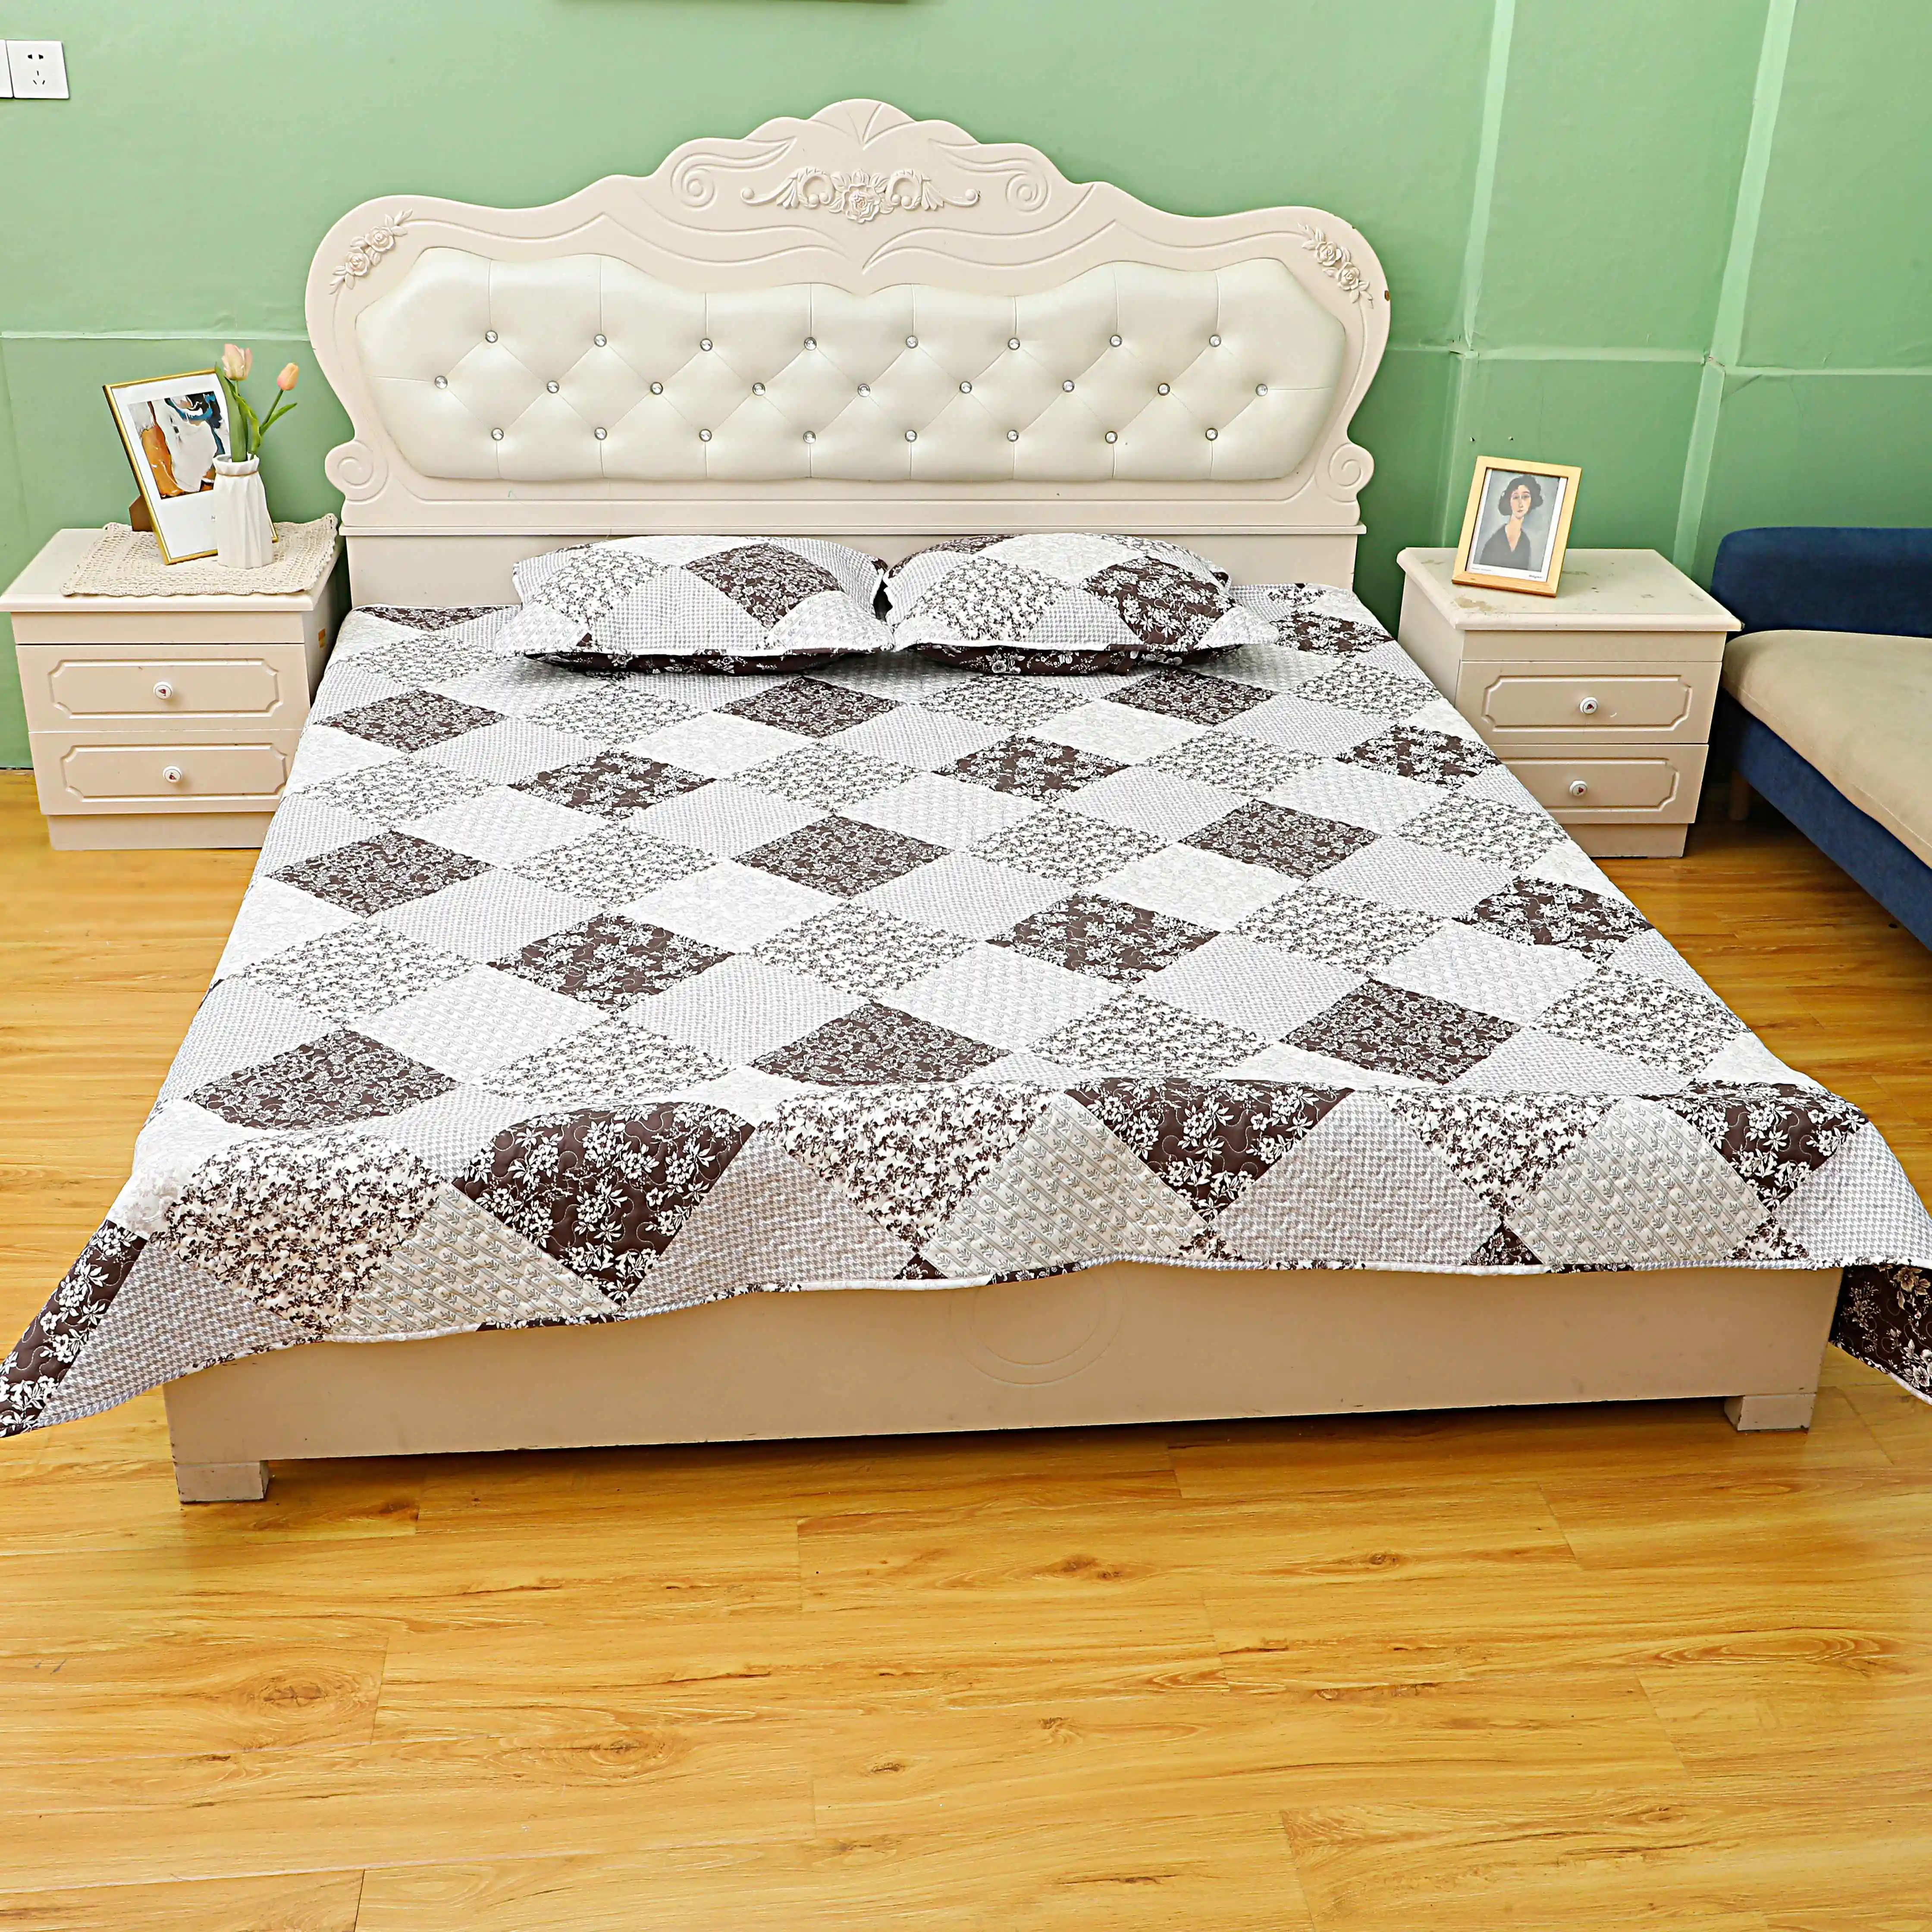 Best-selling Colorful Sewing Patched Thin Quilt printing Bedspread Set